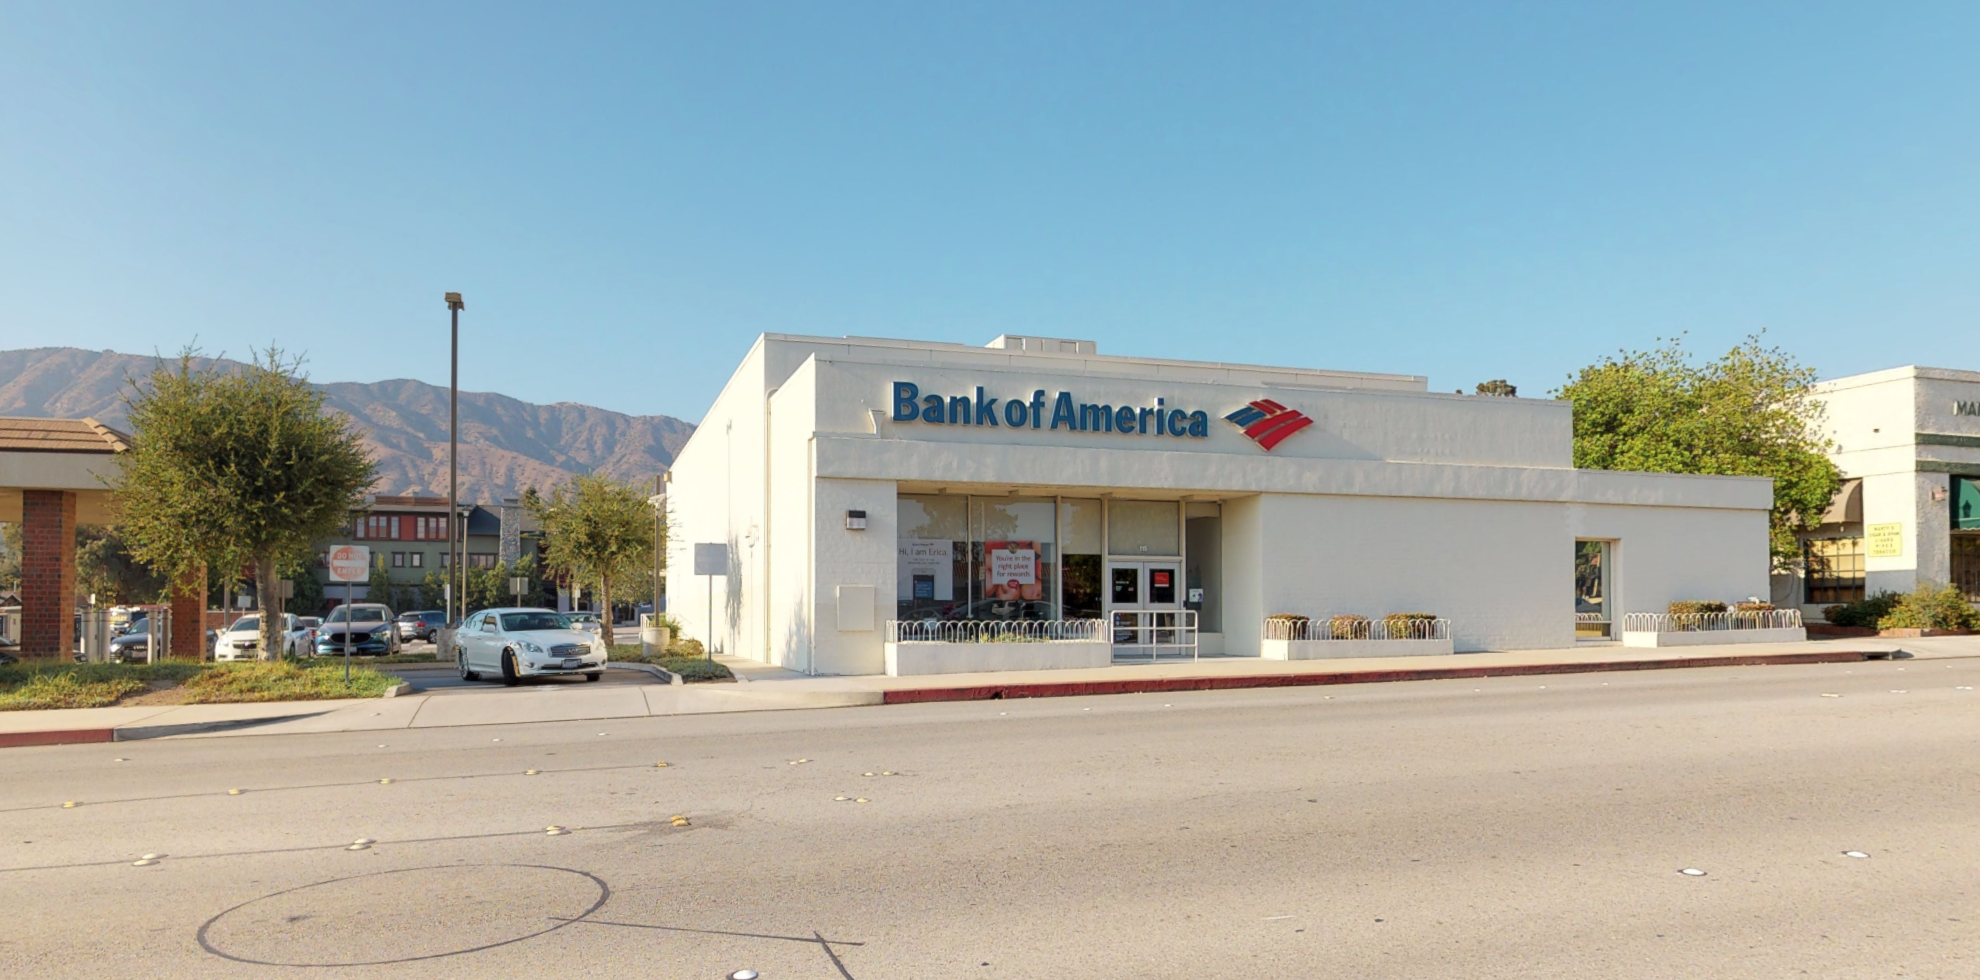 Bank of America financial center with drive-thru ATM | 115 W Foothill Blvd, Glendora, CA 91741